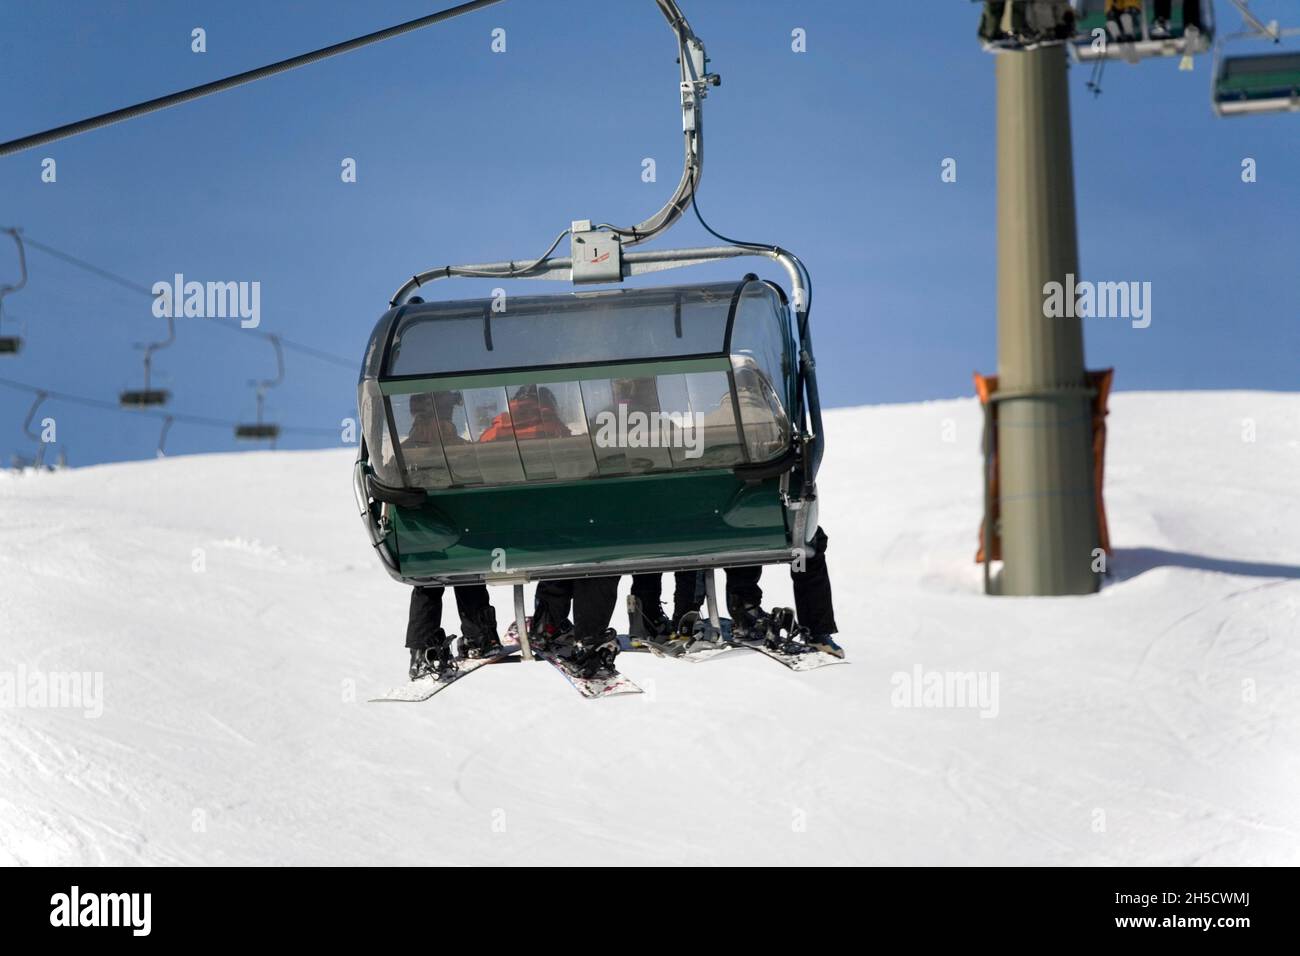 skiers in a chair lift, rear view, Germany, Bavaria Stock Photo